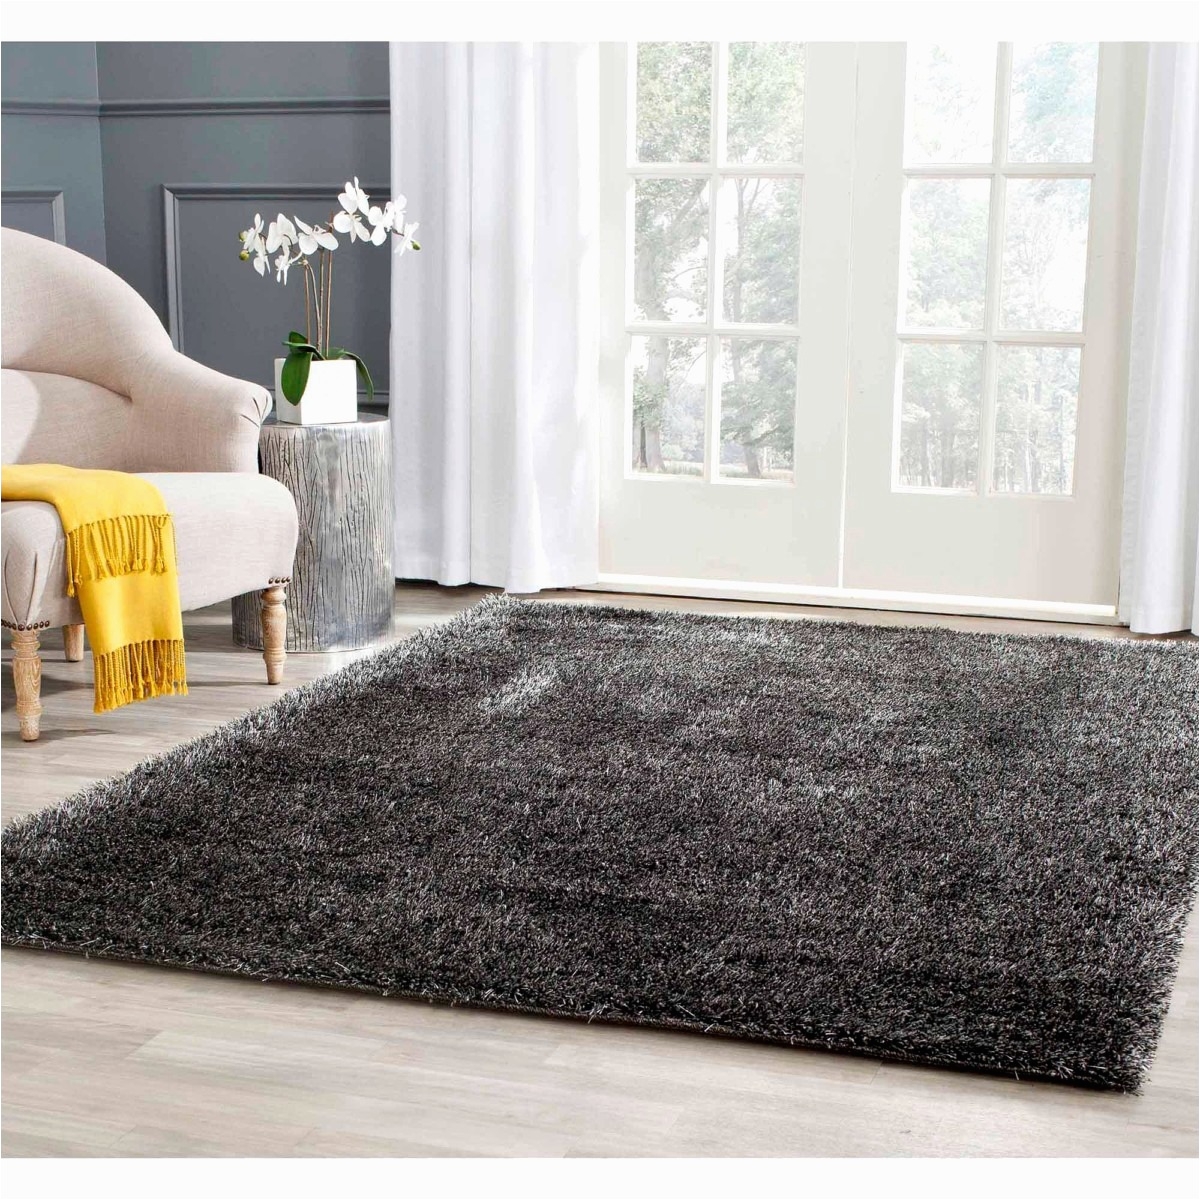 costco indoor outdoor rugs review decoration area rugs at walmart cheap rug round ikea tar